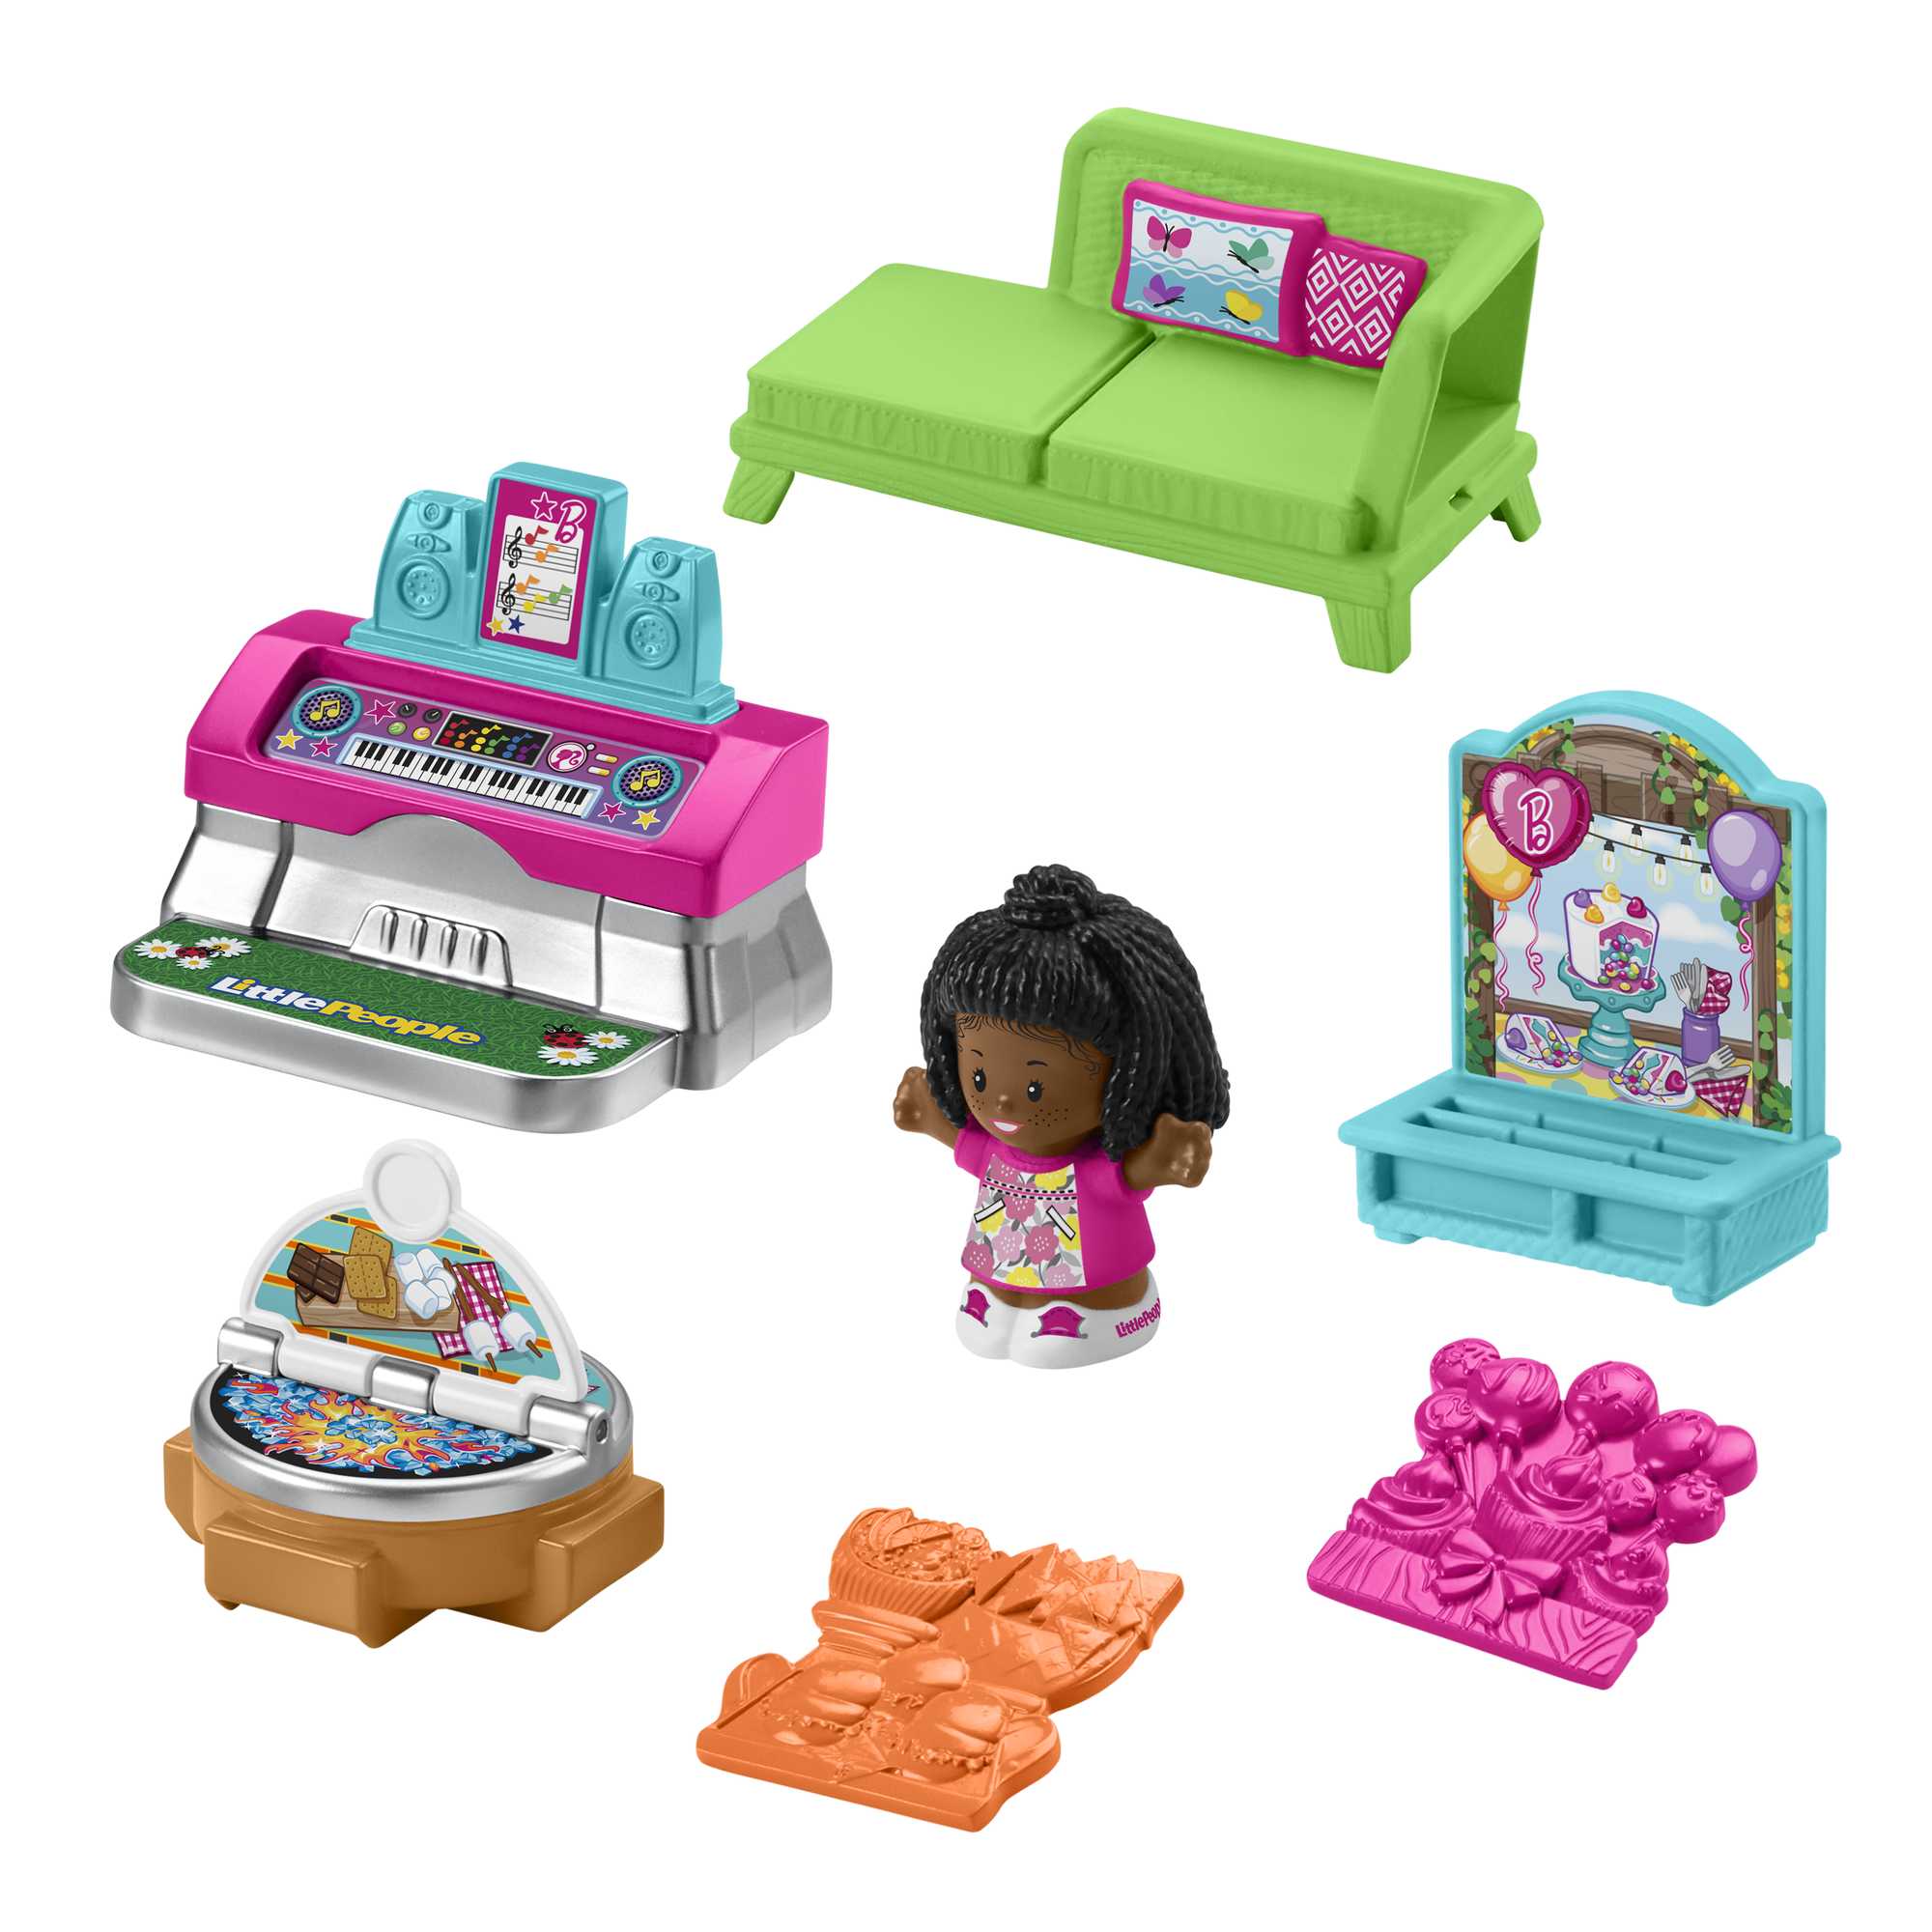 Barbie Patio Playset by Little People Toddler Toy | Mattel